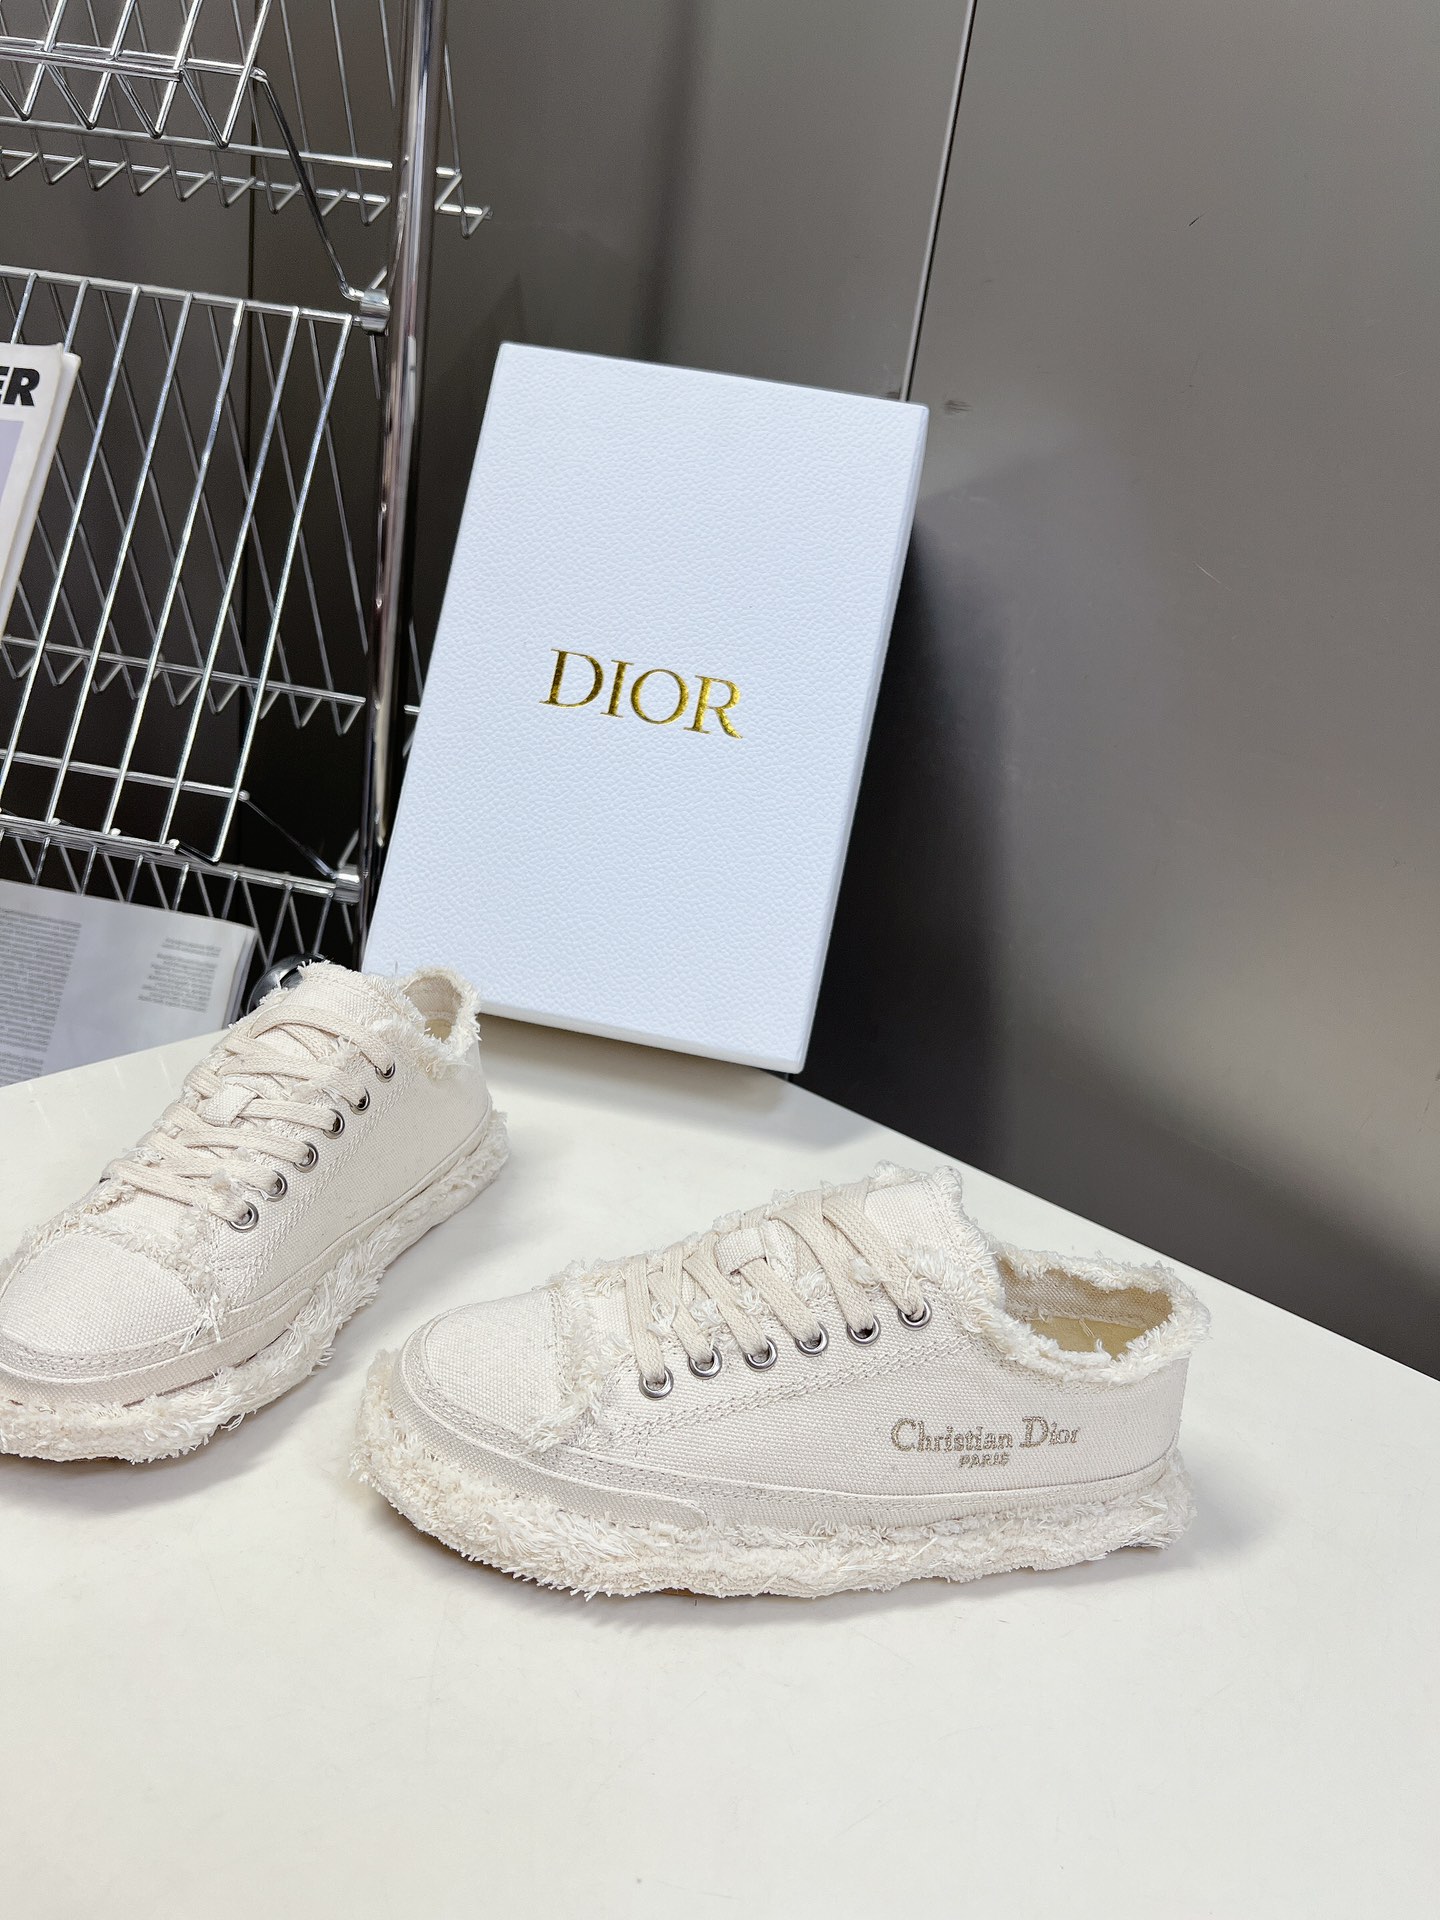 Dior Sneakers Canvas Shoes Embroidery Canvas Cotton Rubber Sheepskin Oblique Casual